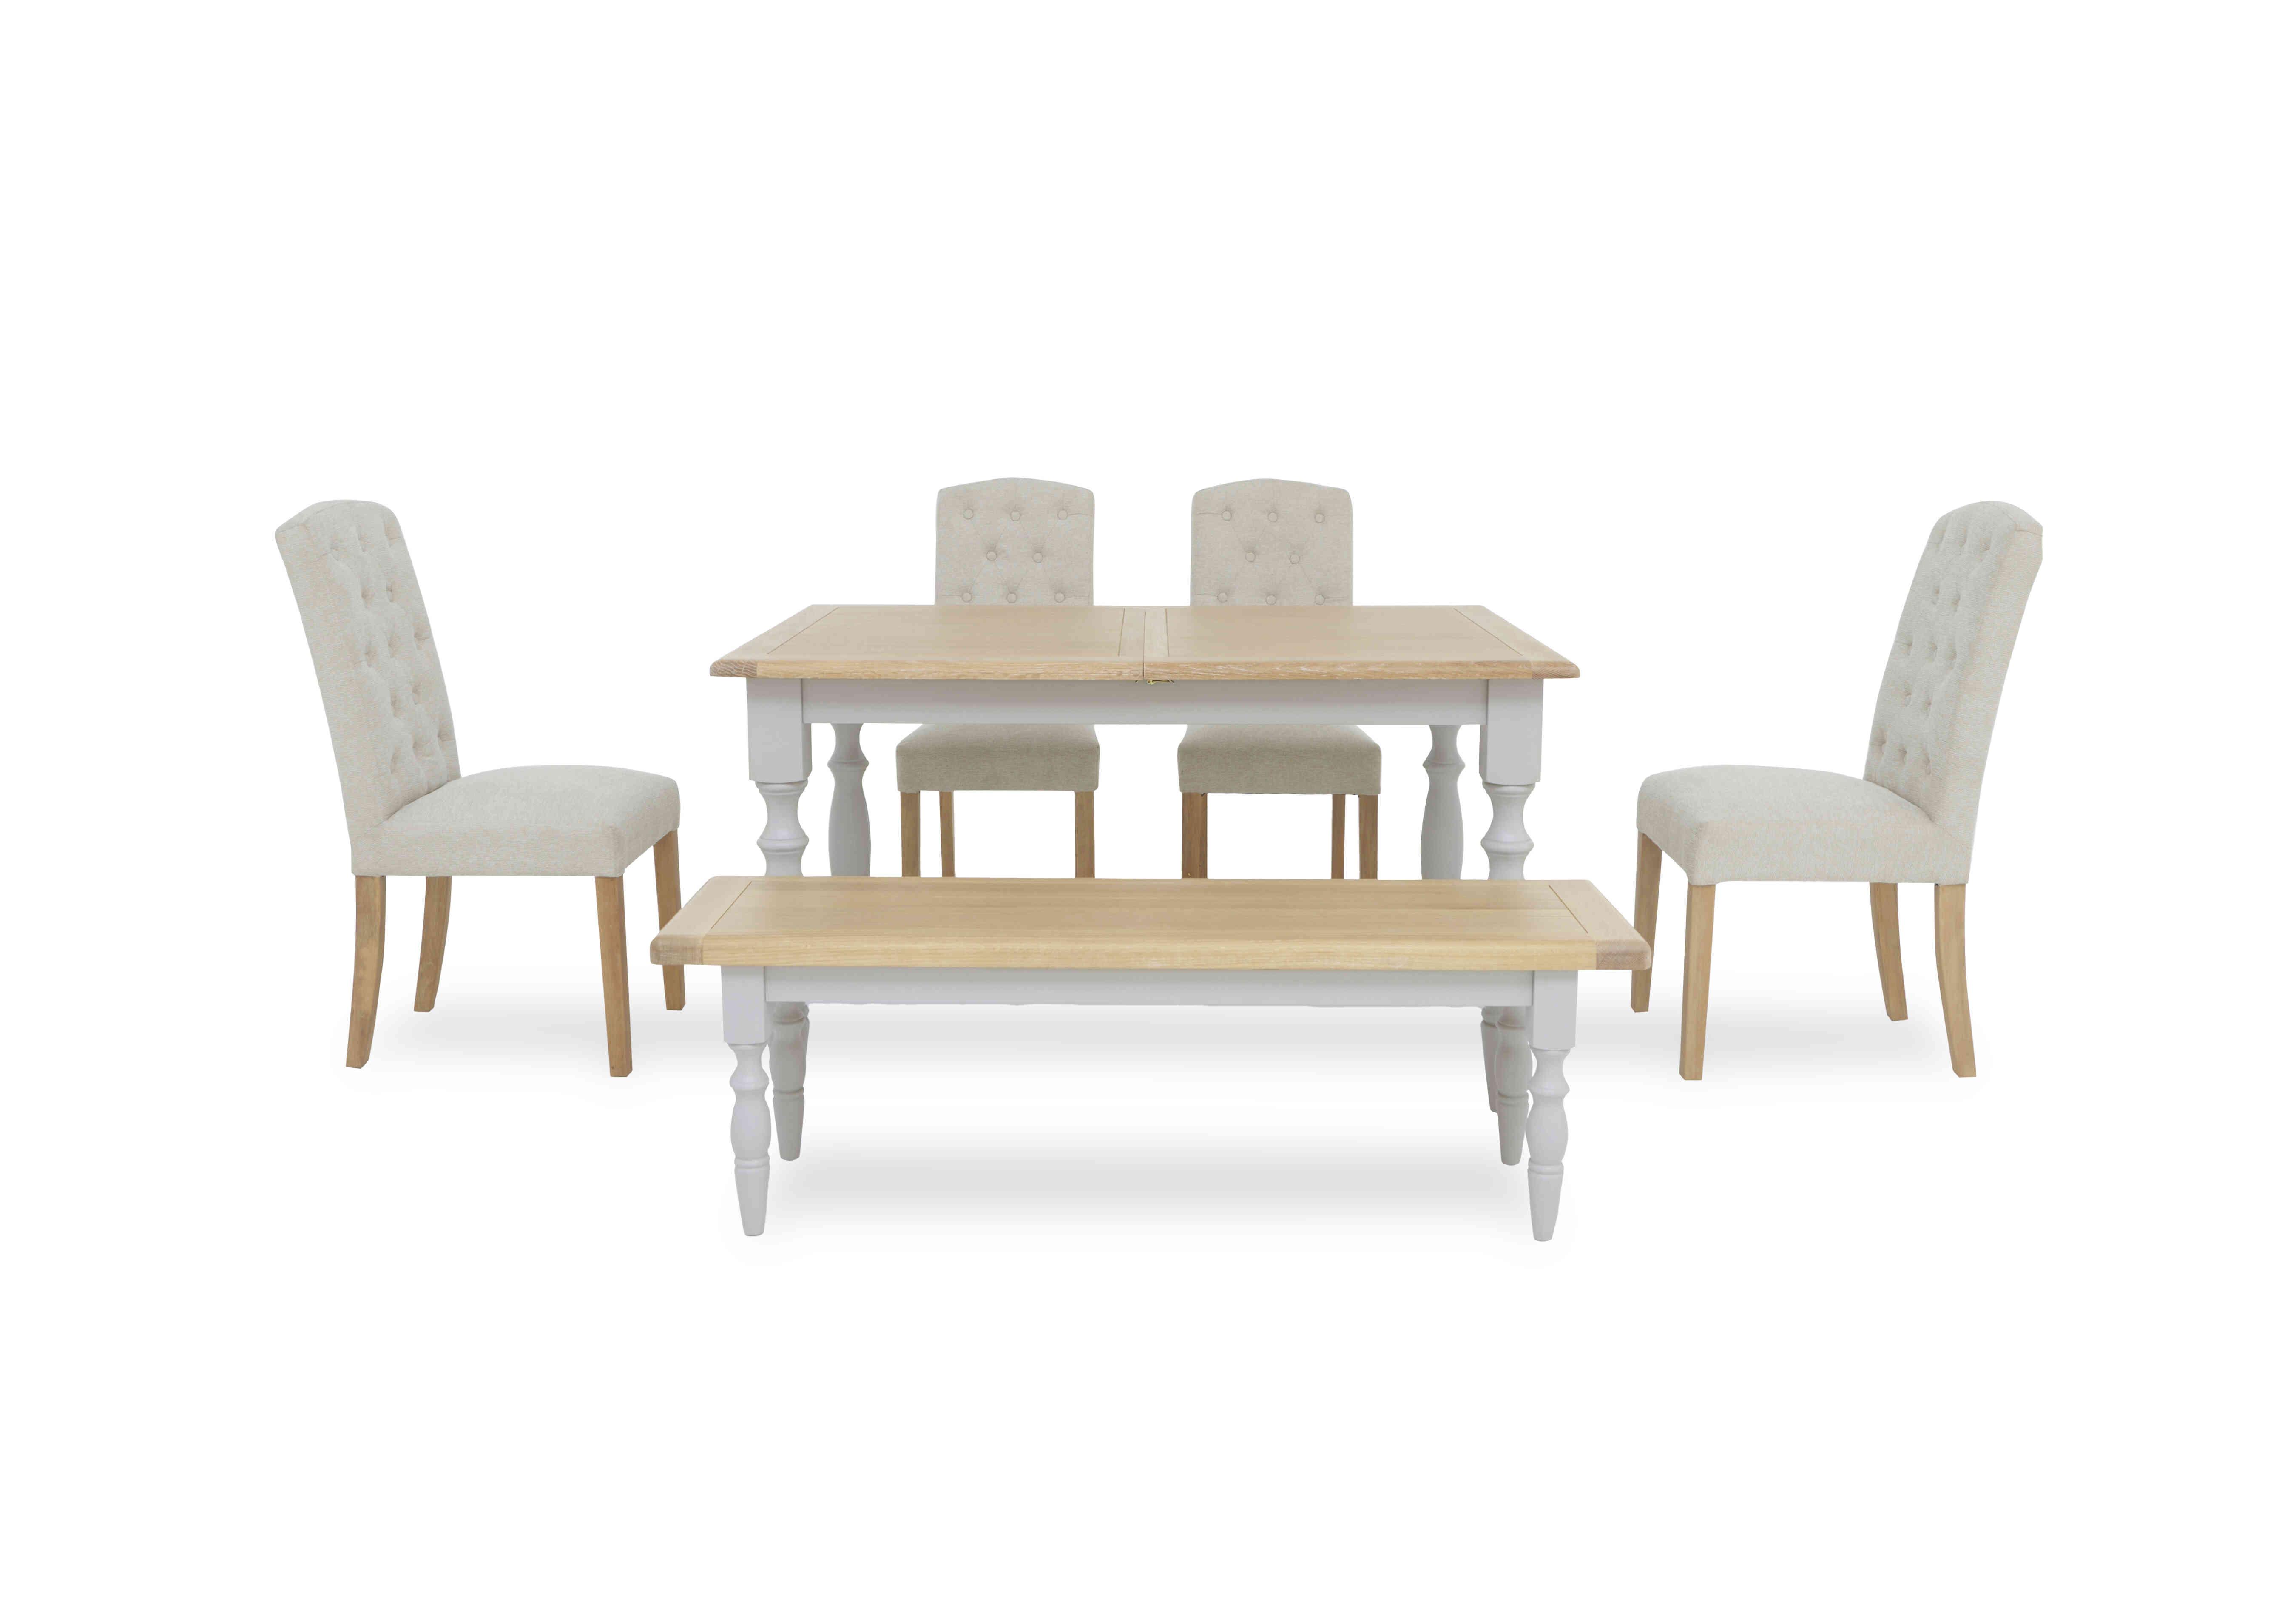 Moore Extending Dining Table with 4 Upholstered Dining Chairs and Dining Bench in  on Furniture Village